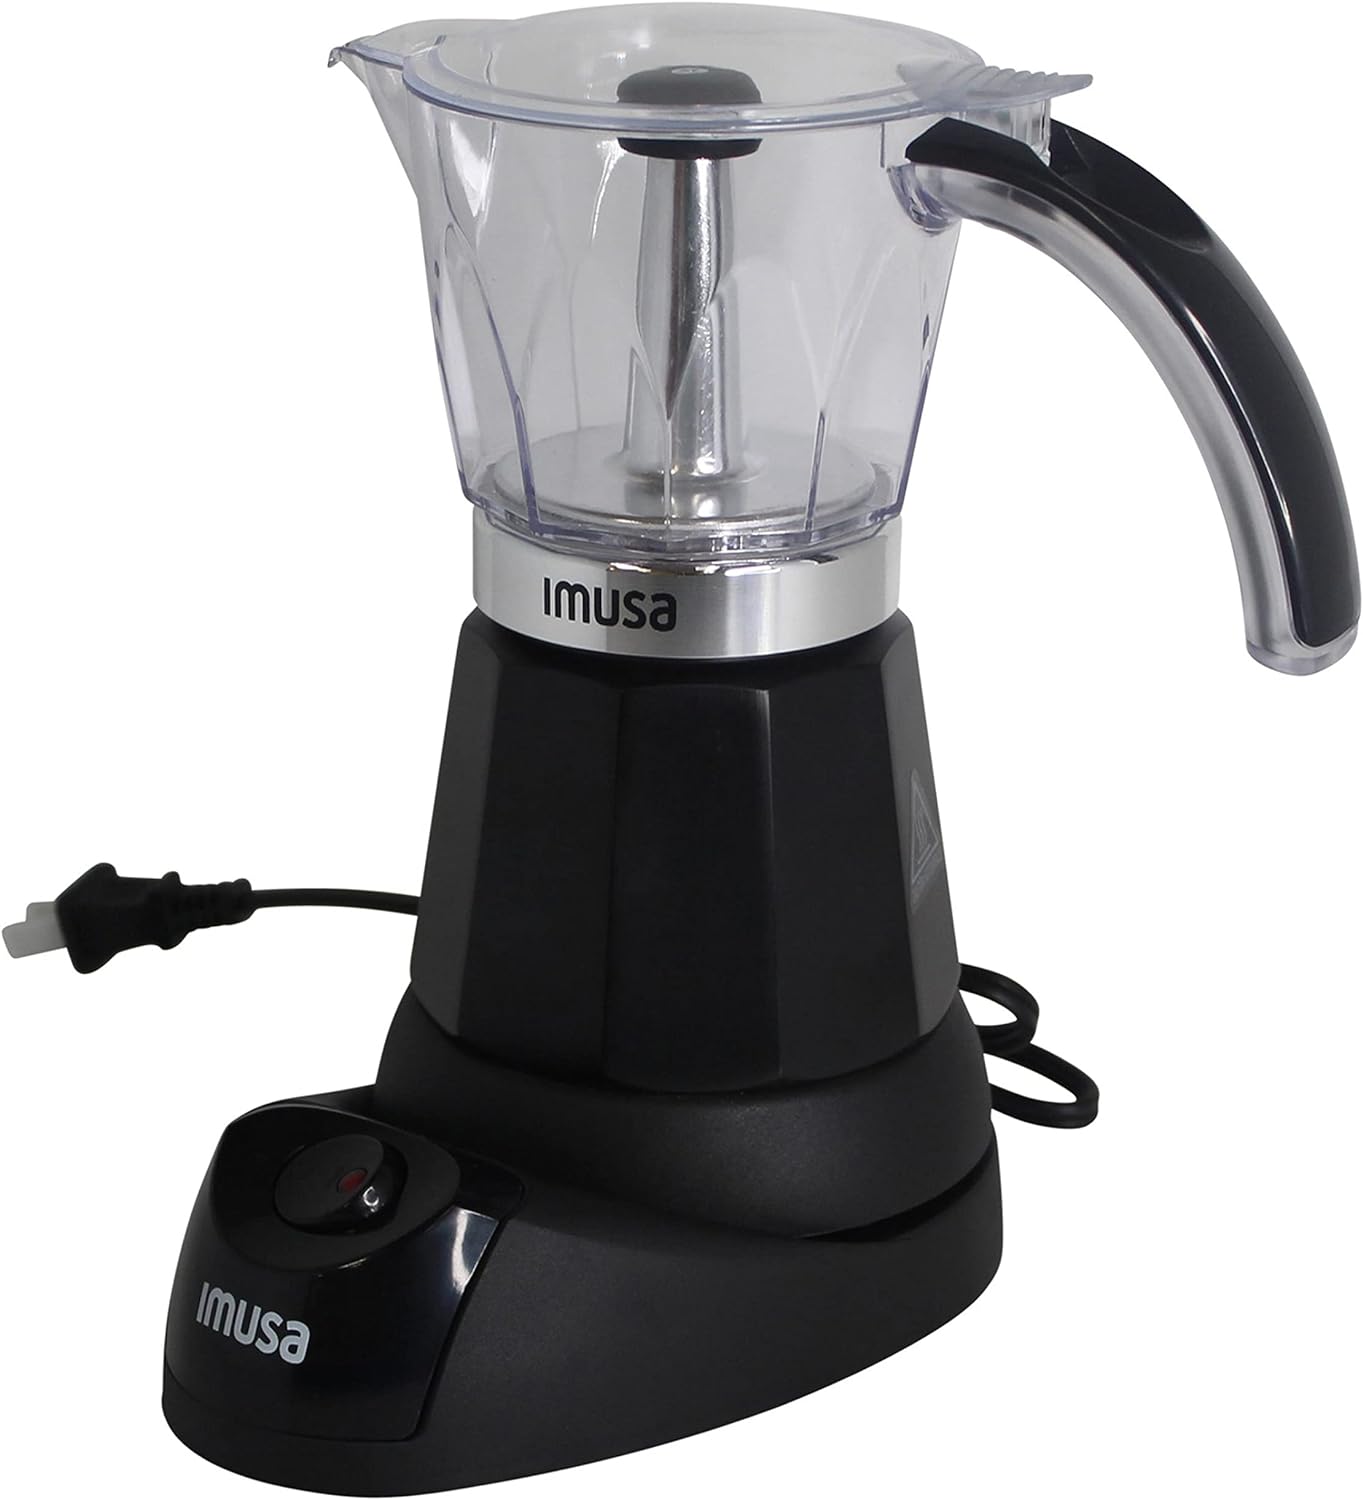 Love it that' its electric, easy to clean and makes excellent espresso